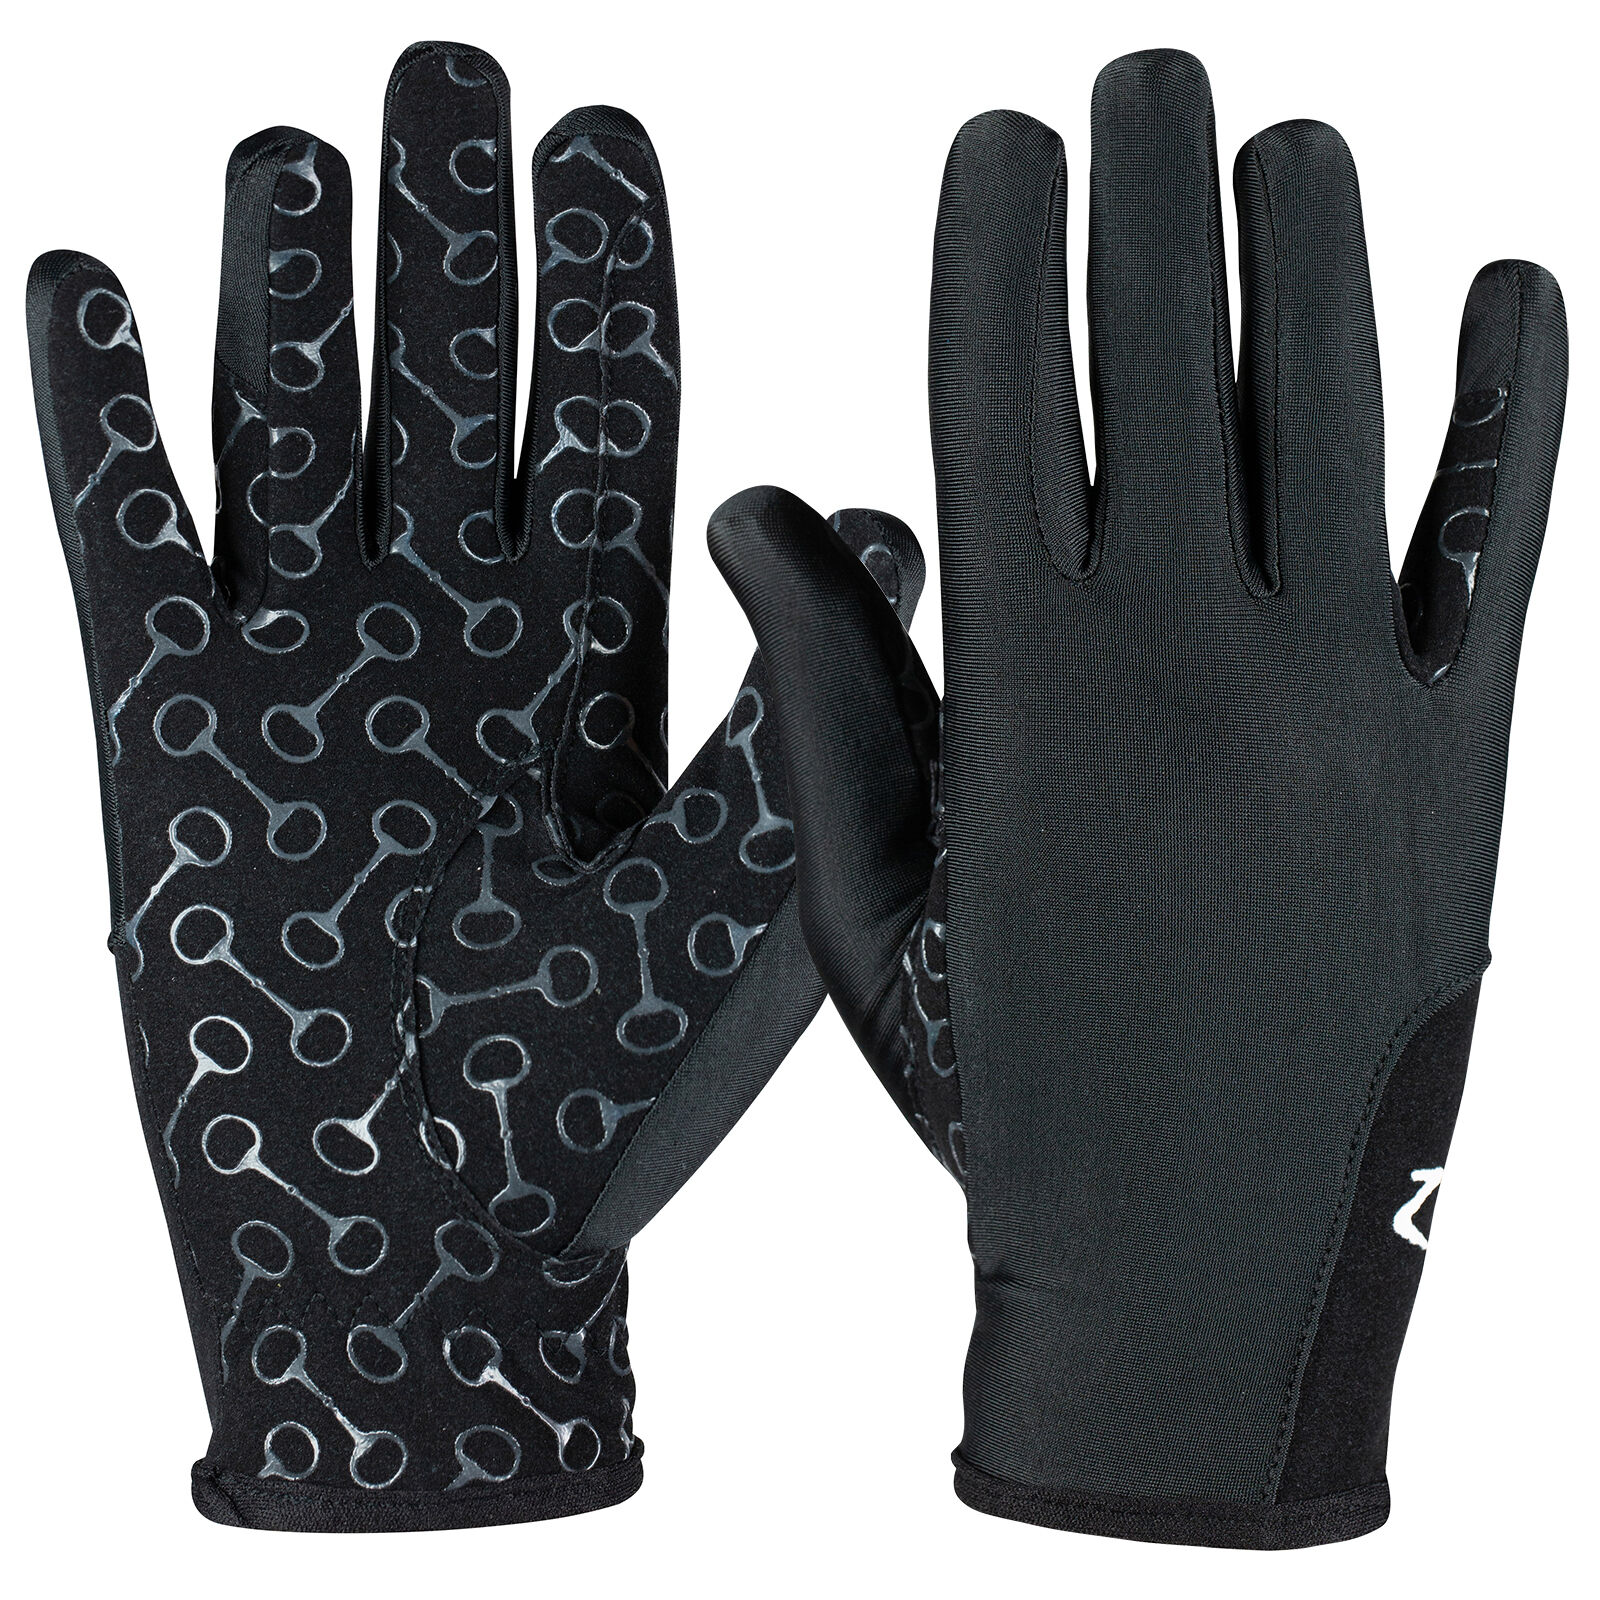 Horze Fleece Gloves with Silicone Grip